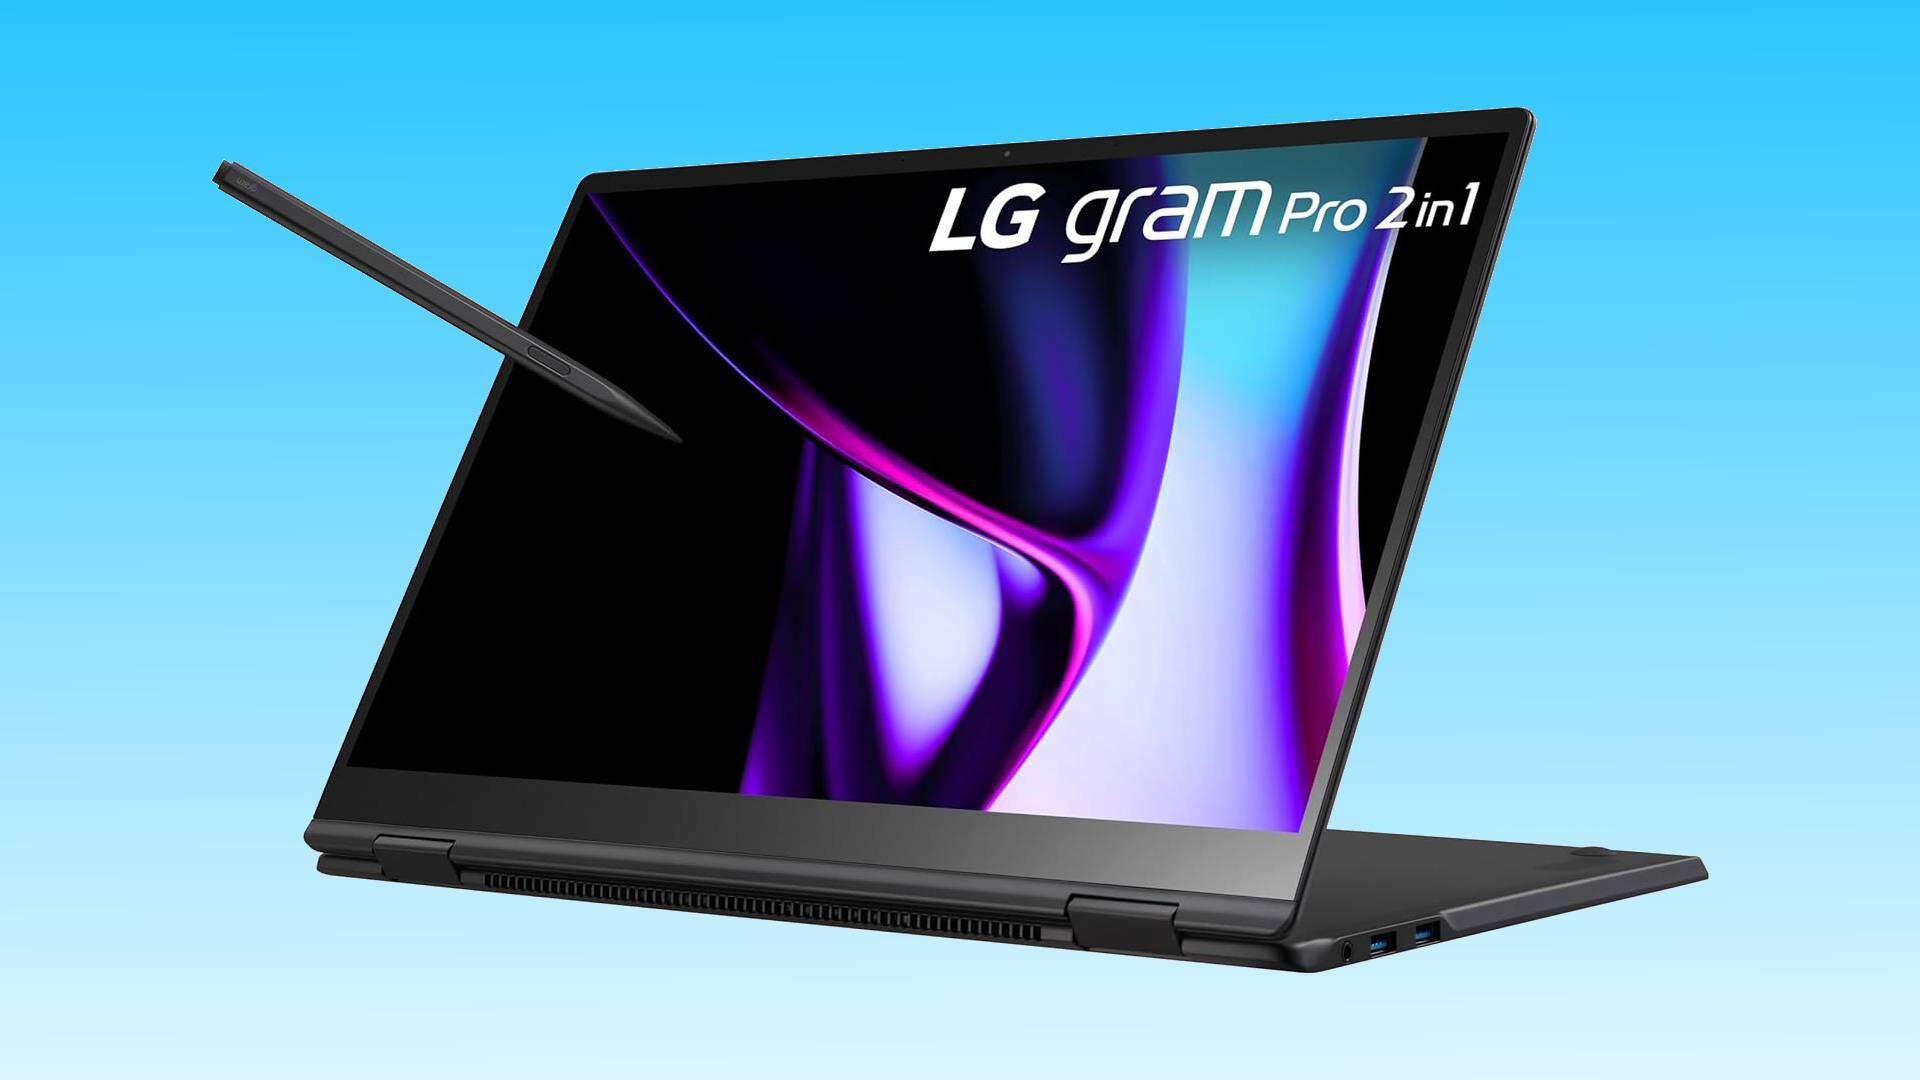 LG 2-in-1 laptop in tent mode with stylus on a blue background, showcasing its colorful display and compact design.